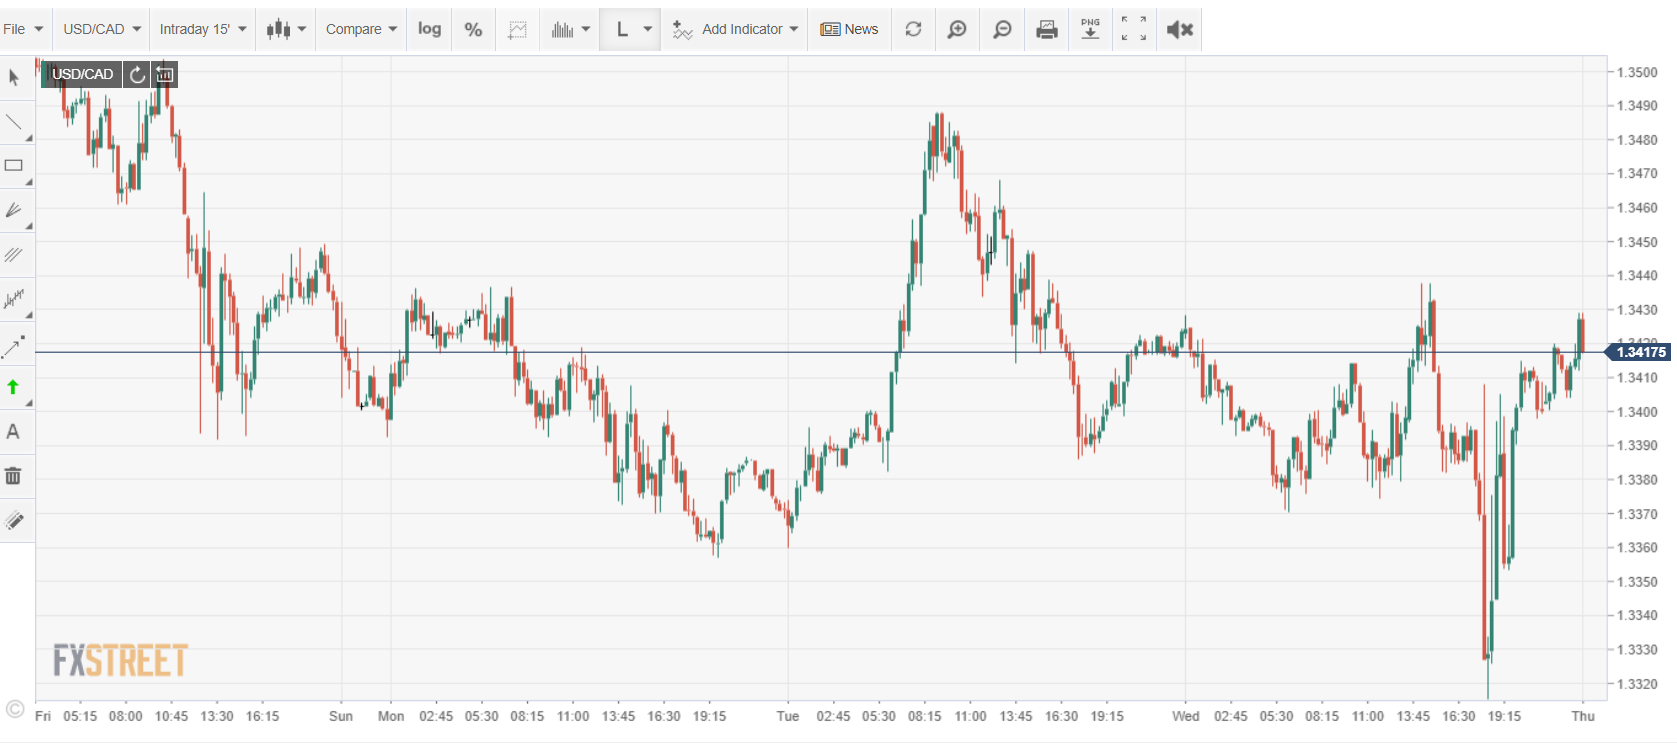 USDCAD FXSTREET Intraday Chart - 11 June 2020